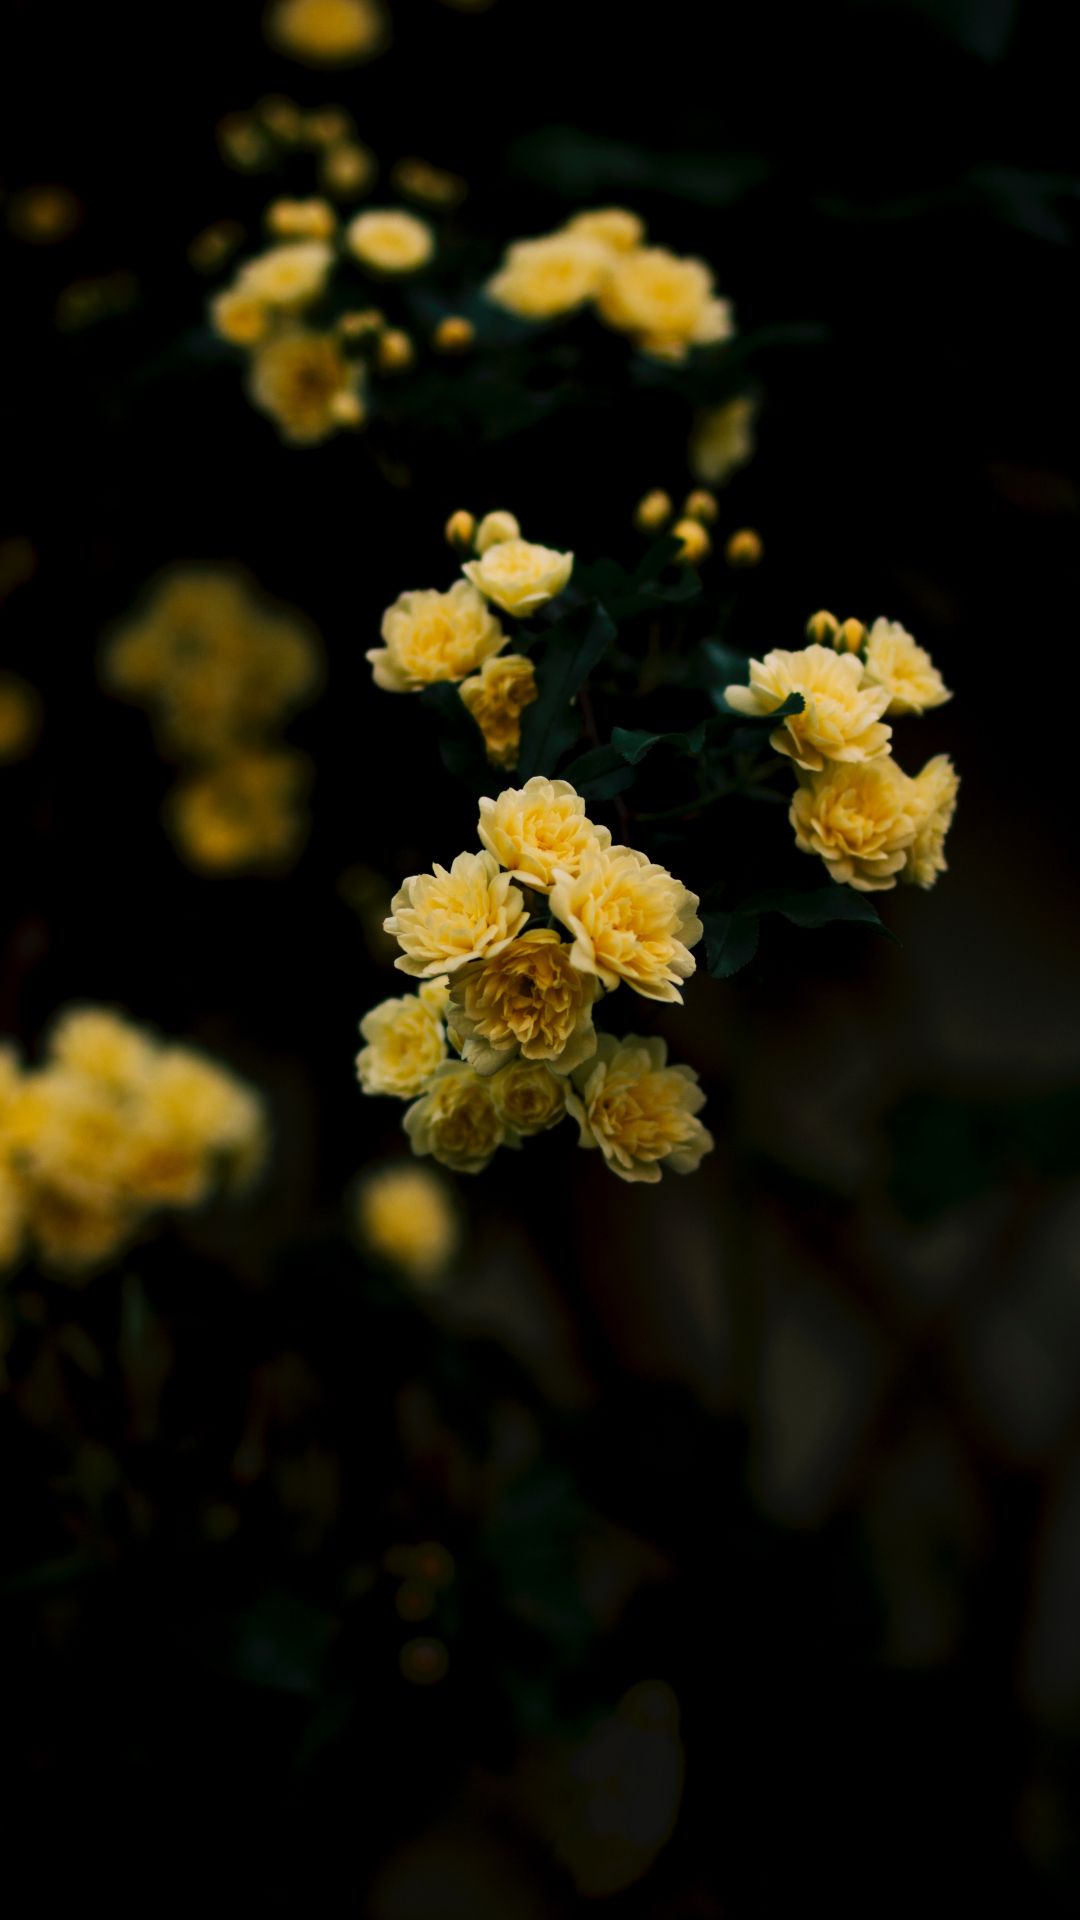 A close up of some yellow flowers - Yellow iphone